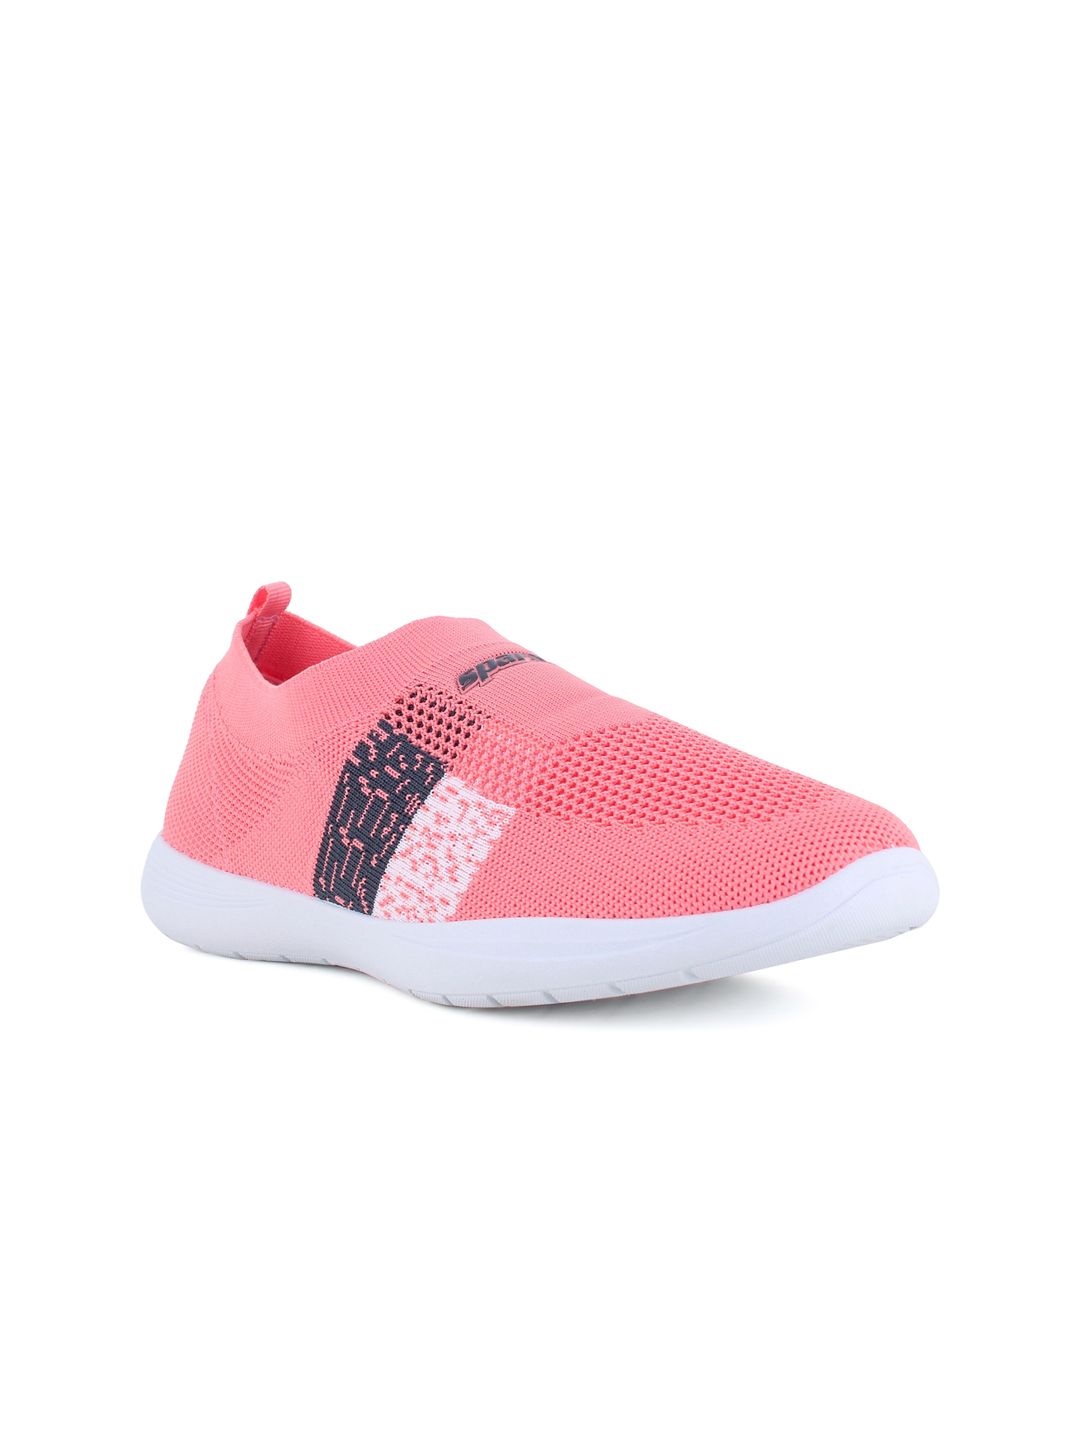 Sparx Women Peach-Coloured Woven Design Slip-On Sneakers Price in India